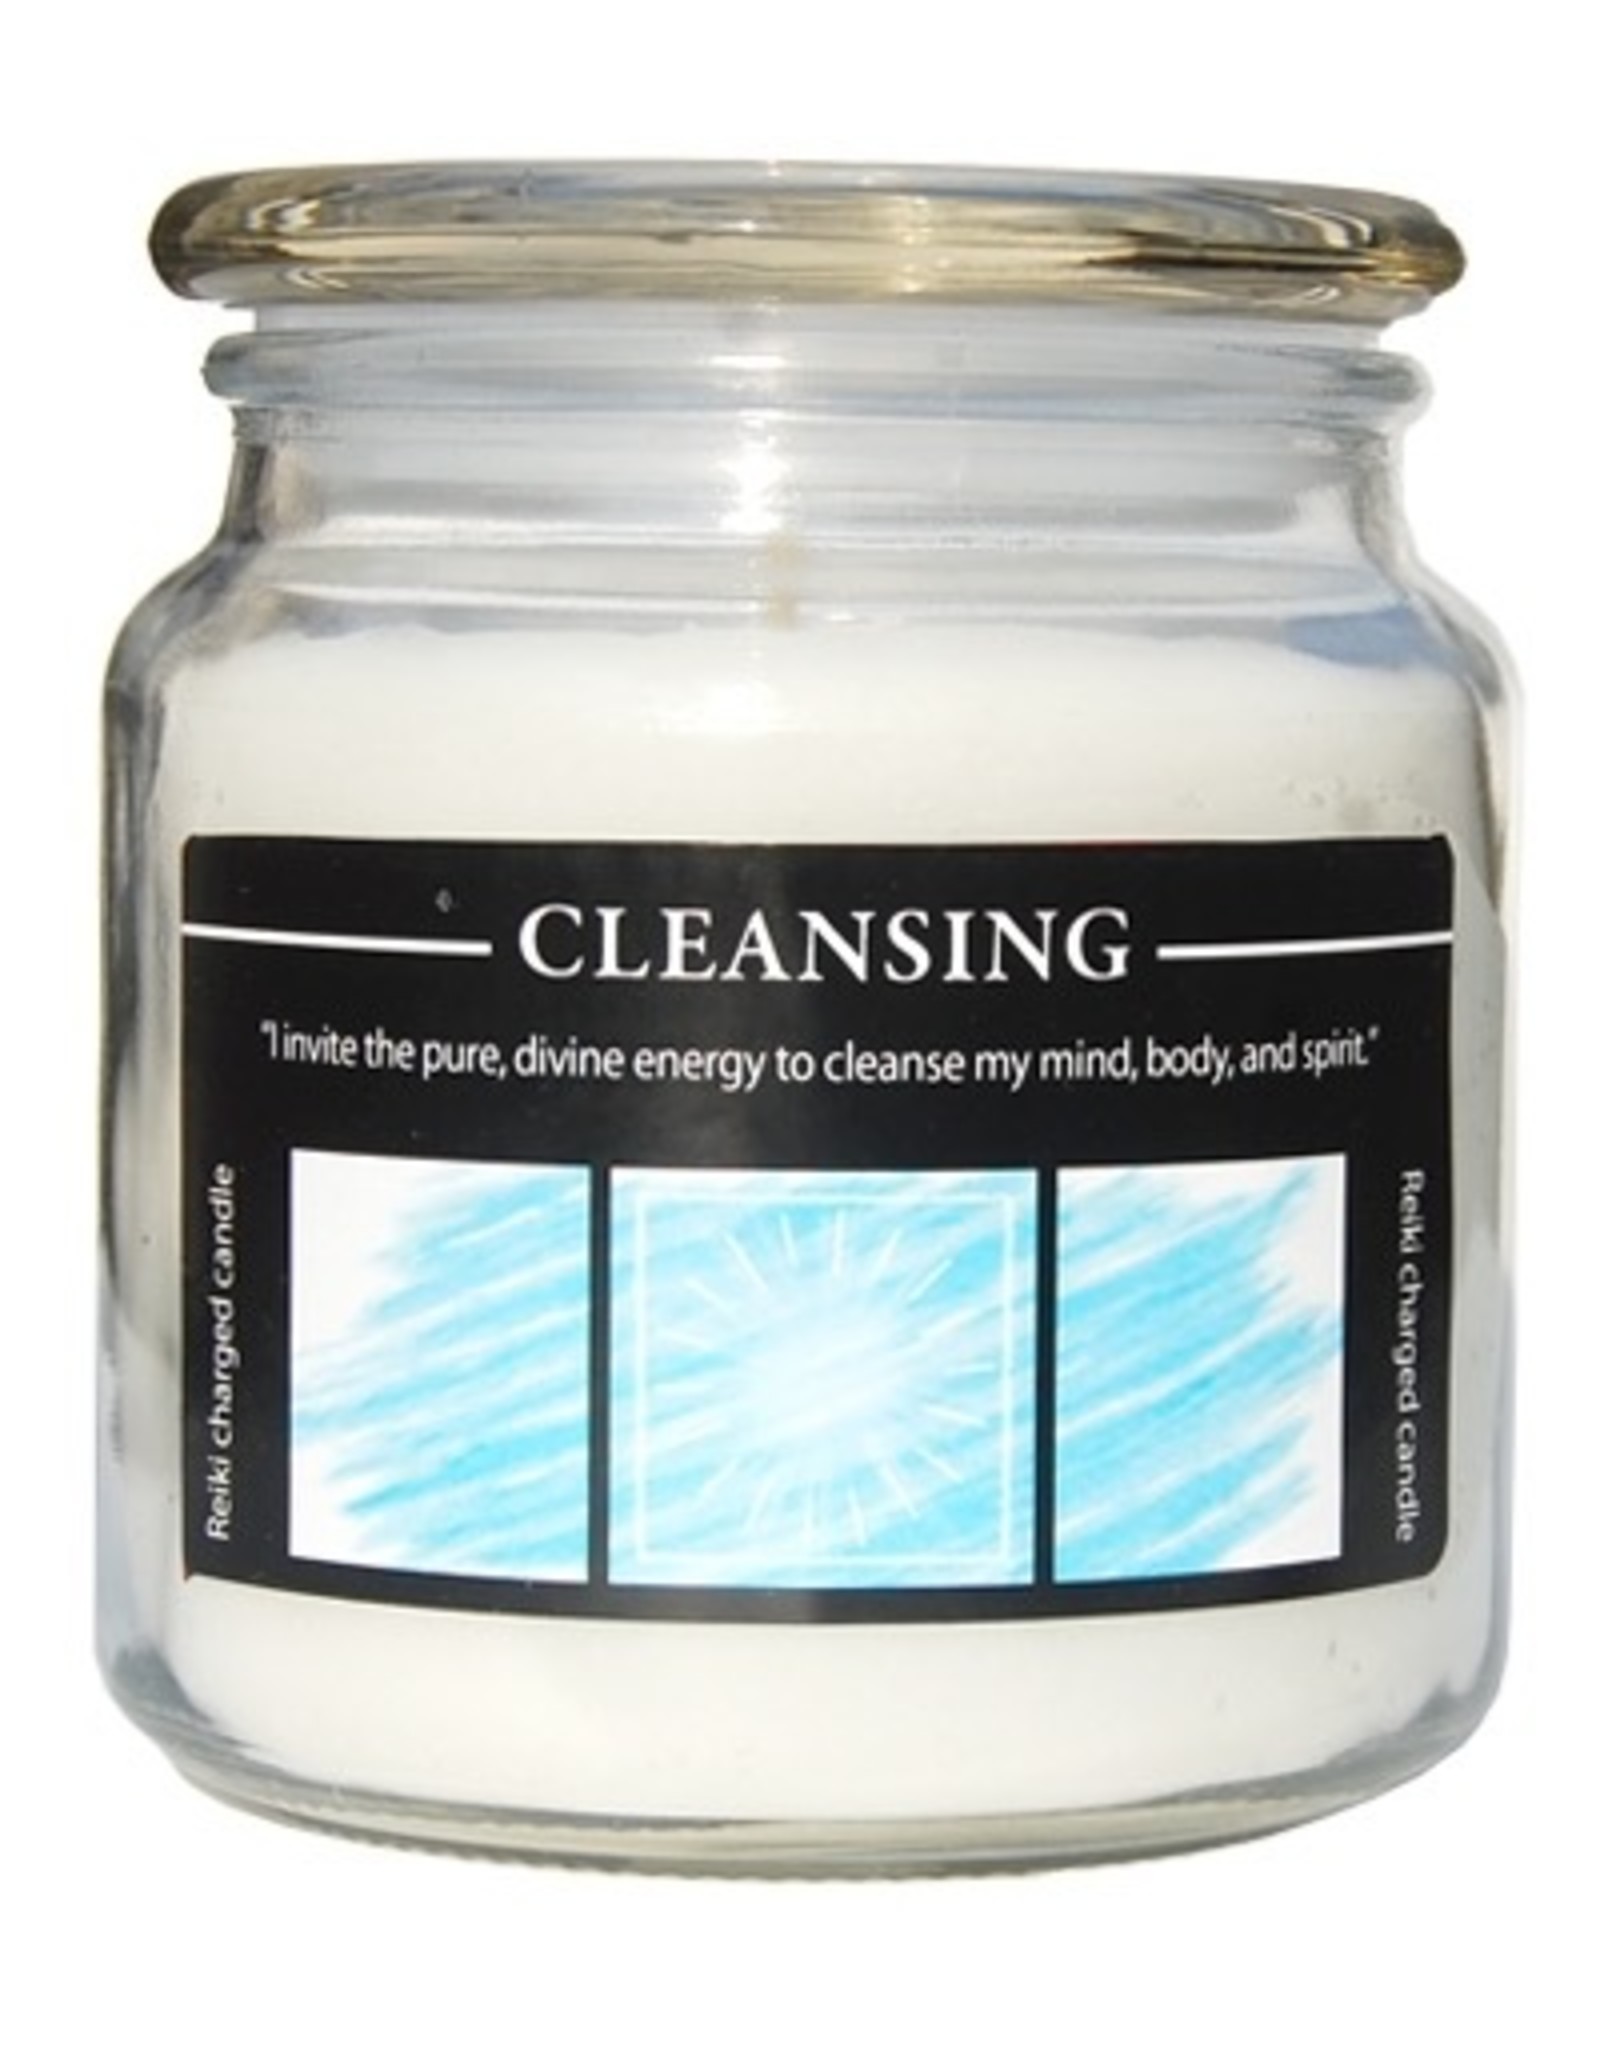 Crystal Journey 16 ounce Cleansing Candle